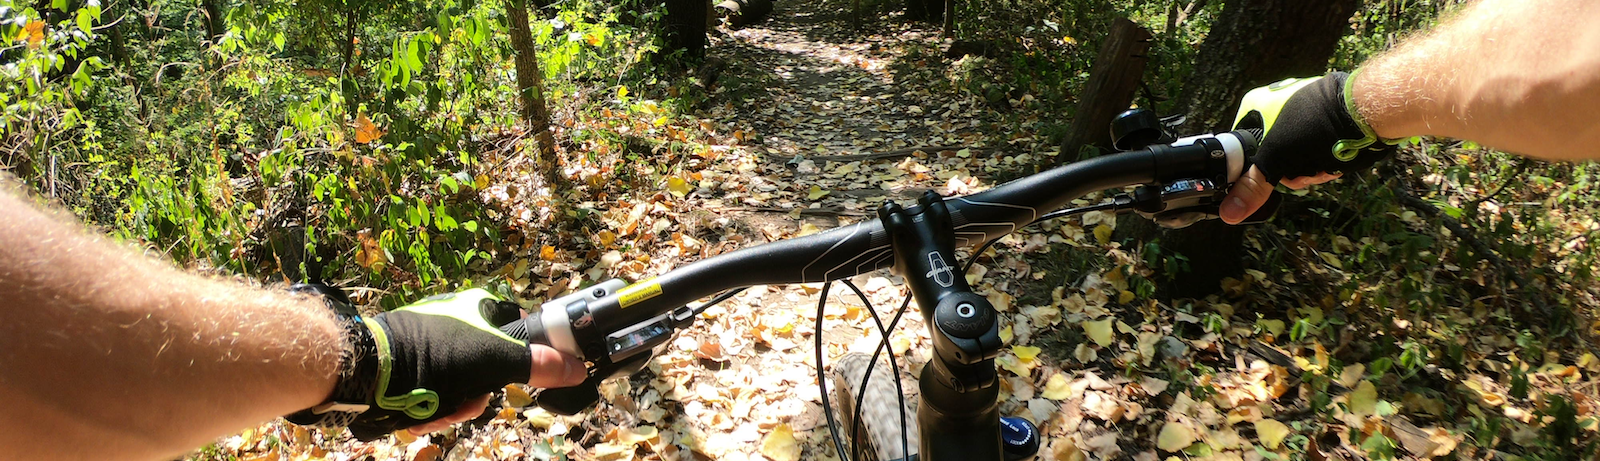 Eight-plus miles of singletrack mountain biking trails connect to Grace College.